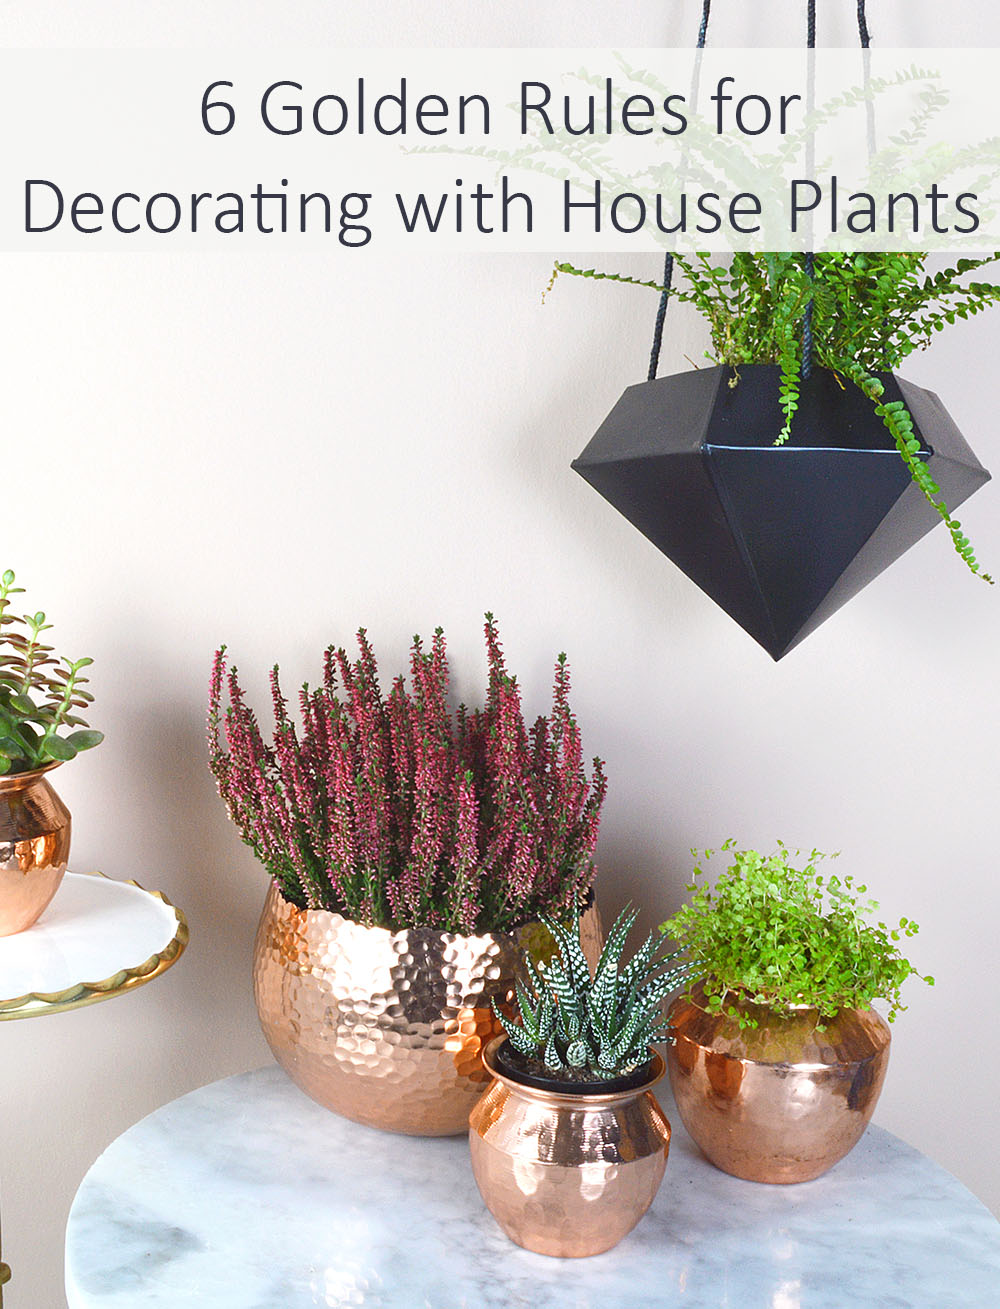 House plants bring a wonderful organic quality to your home and, as an added bonus, they are good for cleansing the air. So to help you incorporate them in your own home, here’s my 6 golden rules for decorating with house plants.